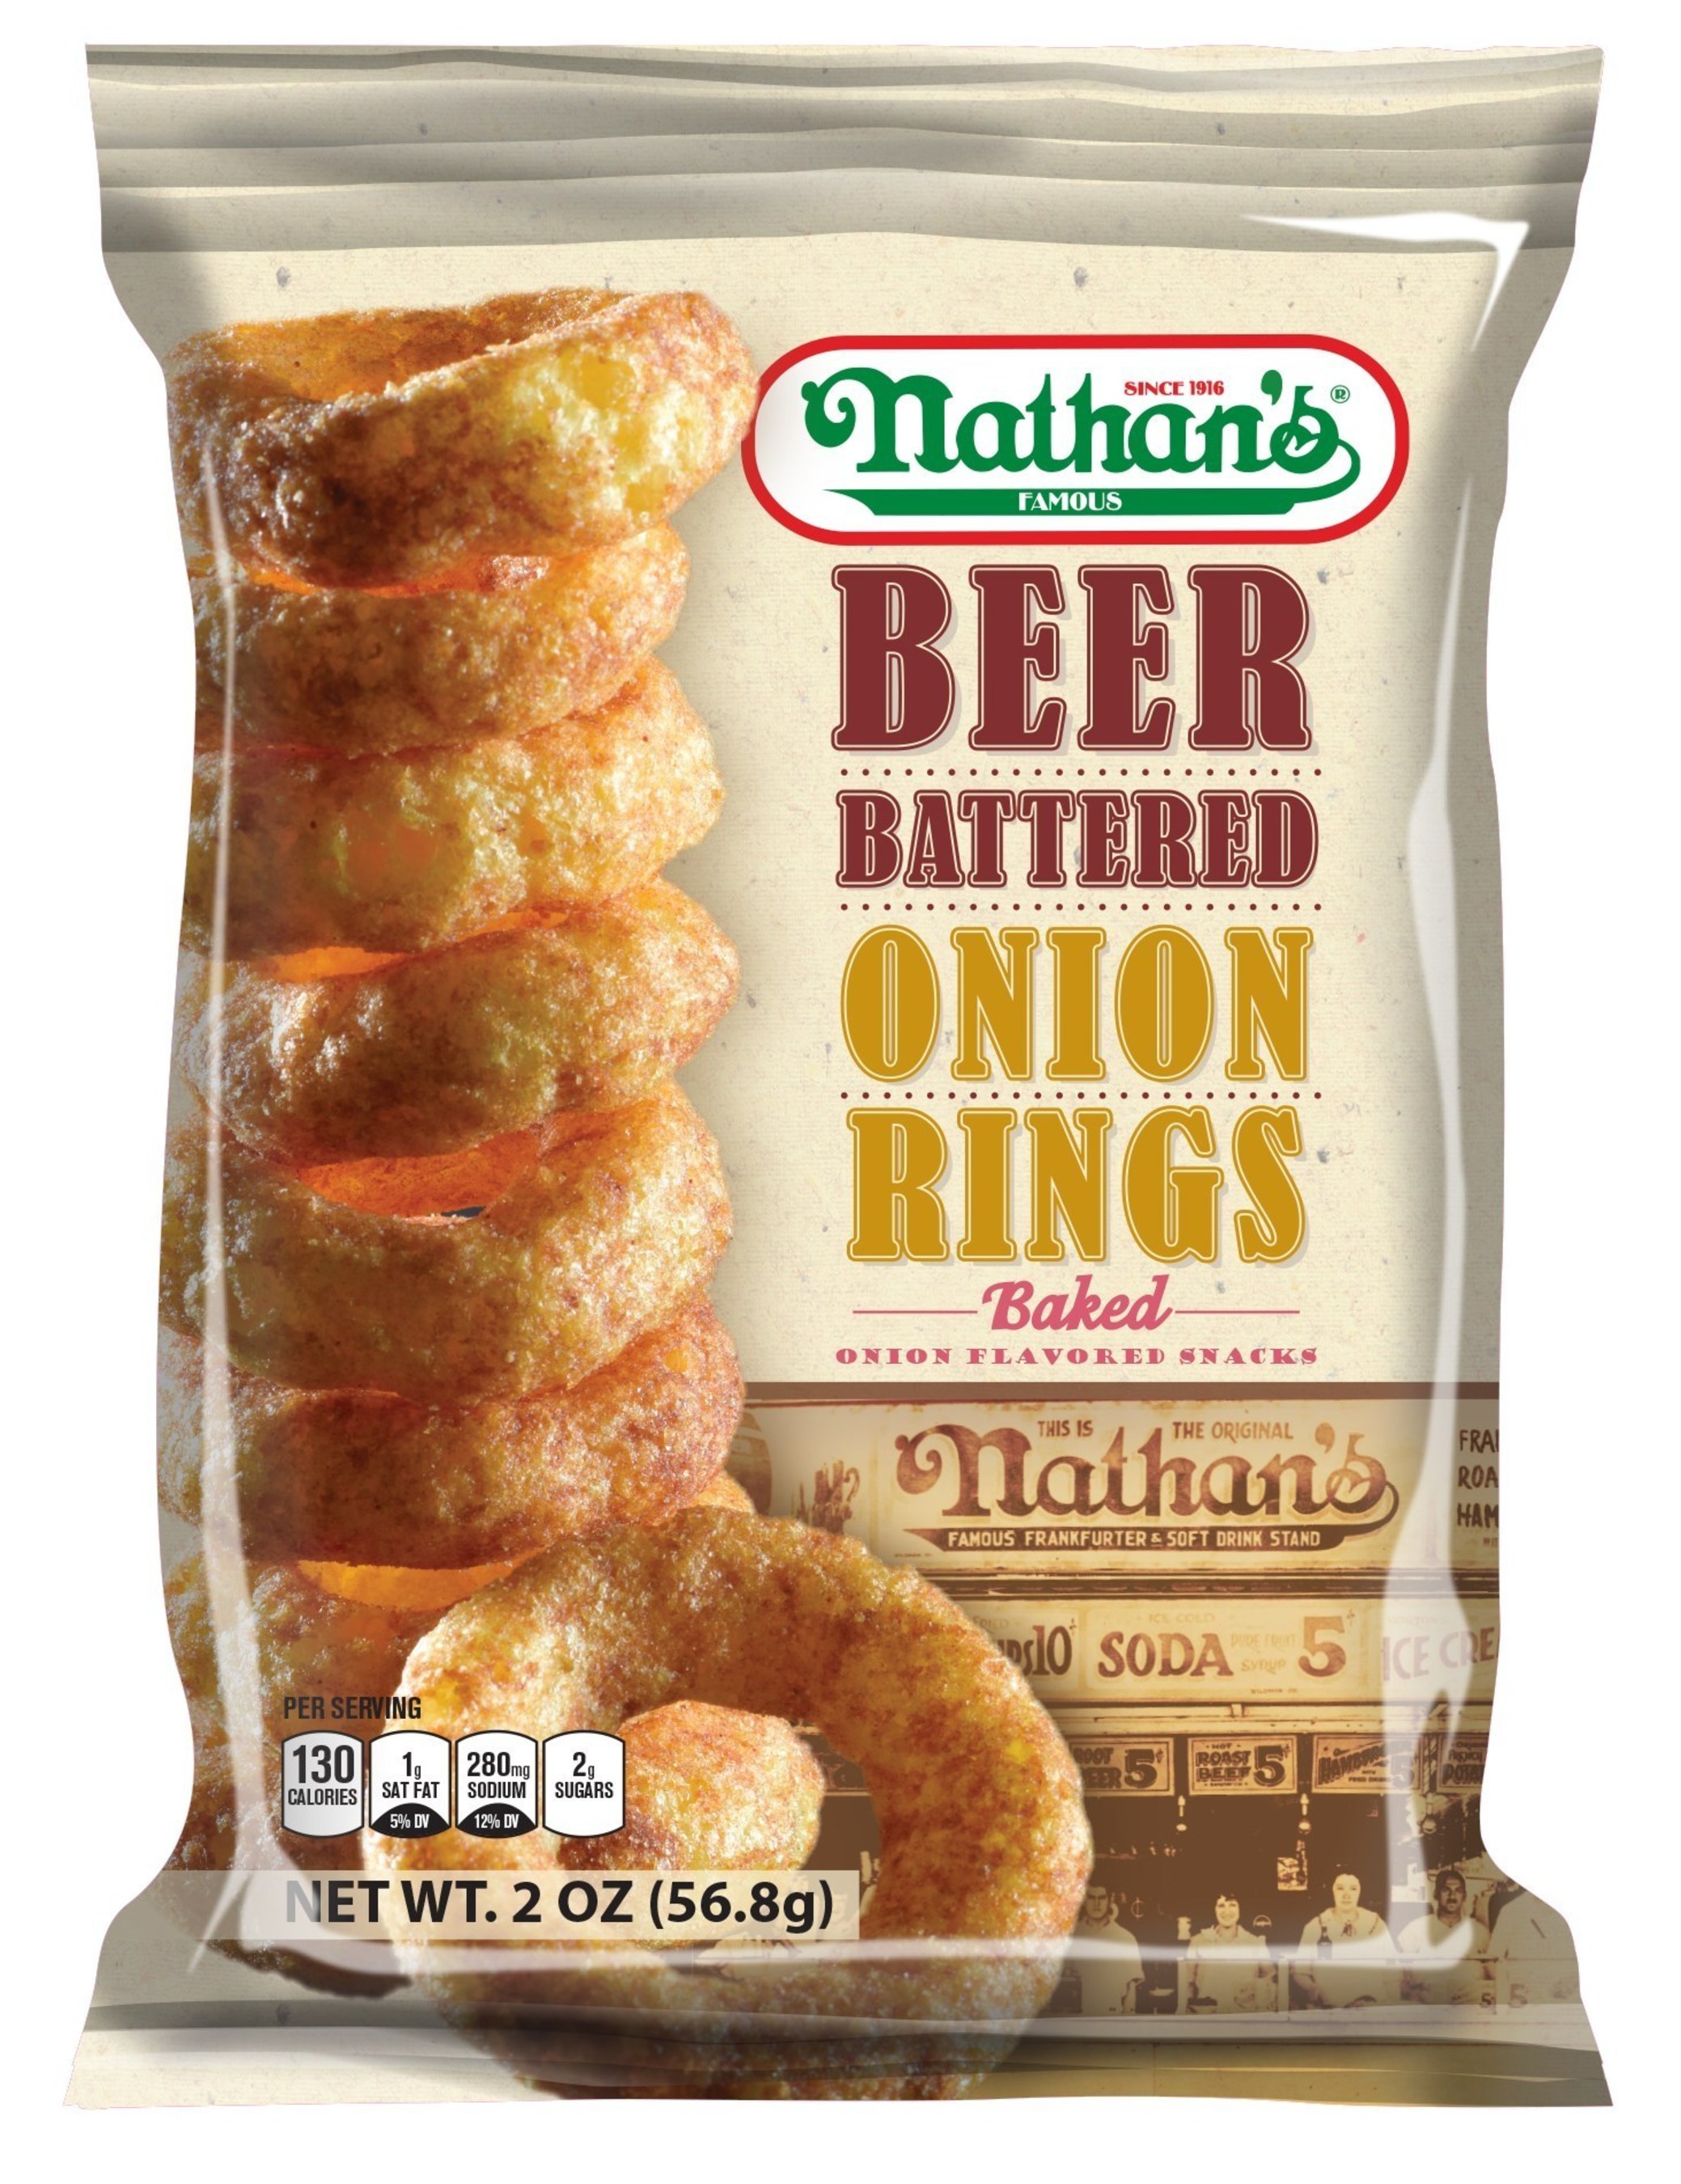 Nathan's Famous(R) snack-line introduces on trend onion-flavored snack with beer battered onion rings